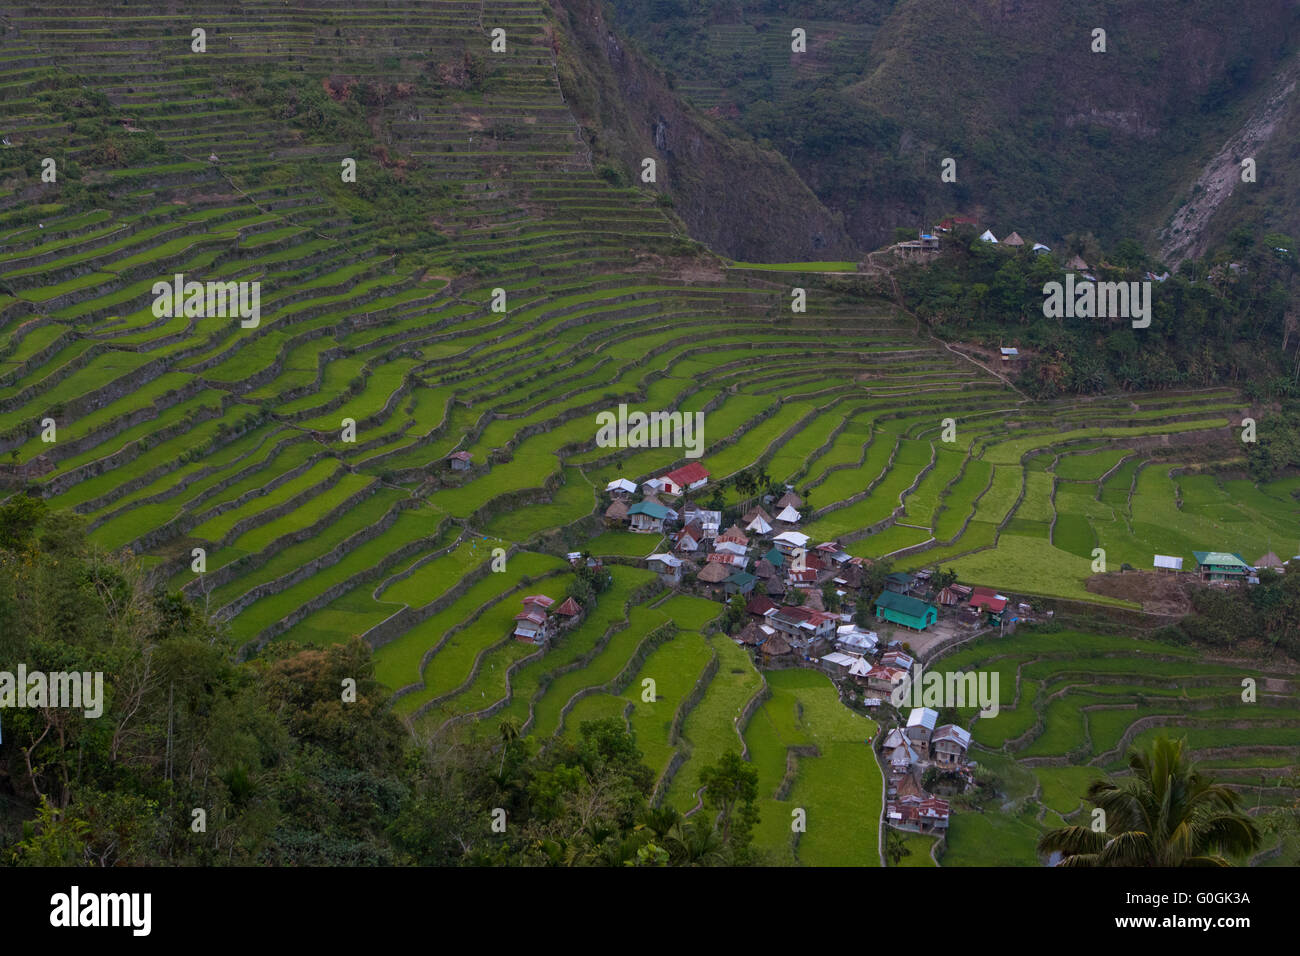 Ancient Rice Terraces of Batad located in the region of Banaue,Cordilleras,Northern Philippines Stock Photo